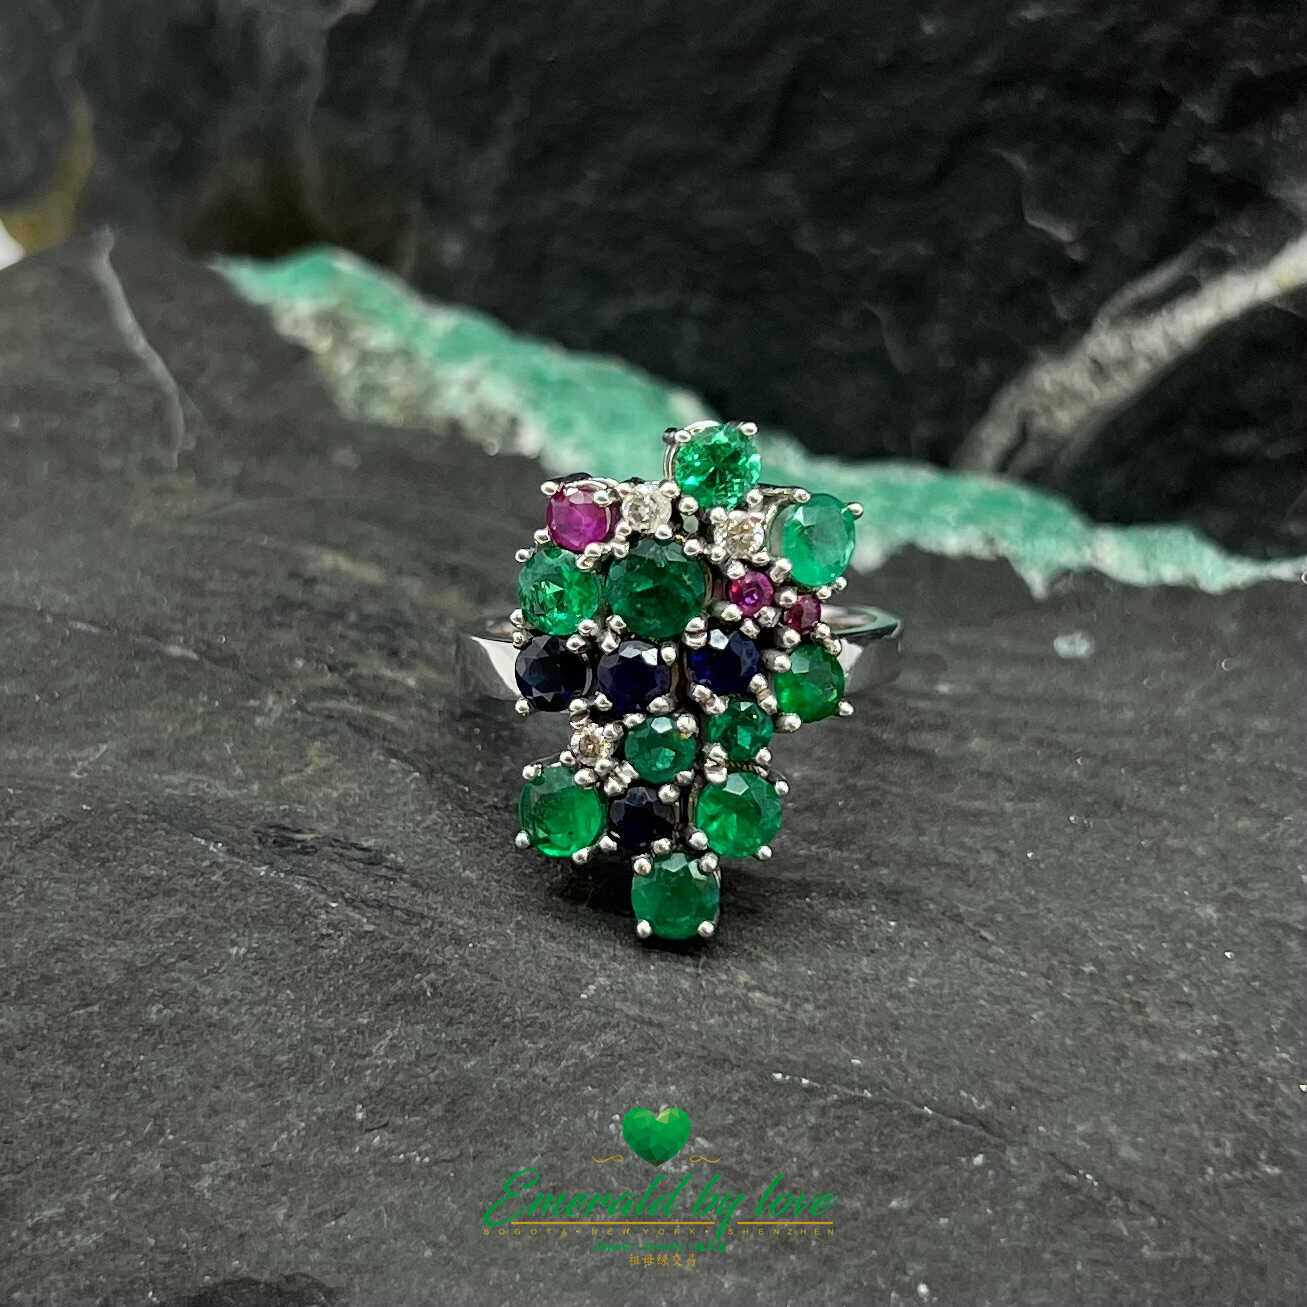 White Gold Ring with Emeralds, Sapphires, Rubies, and Diamonds